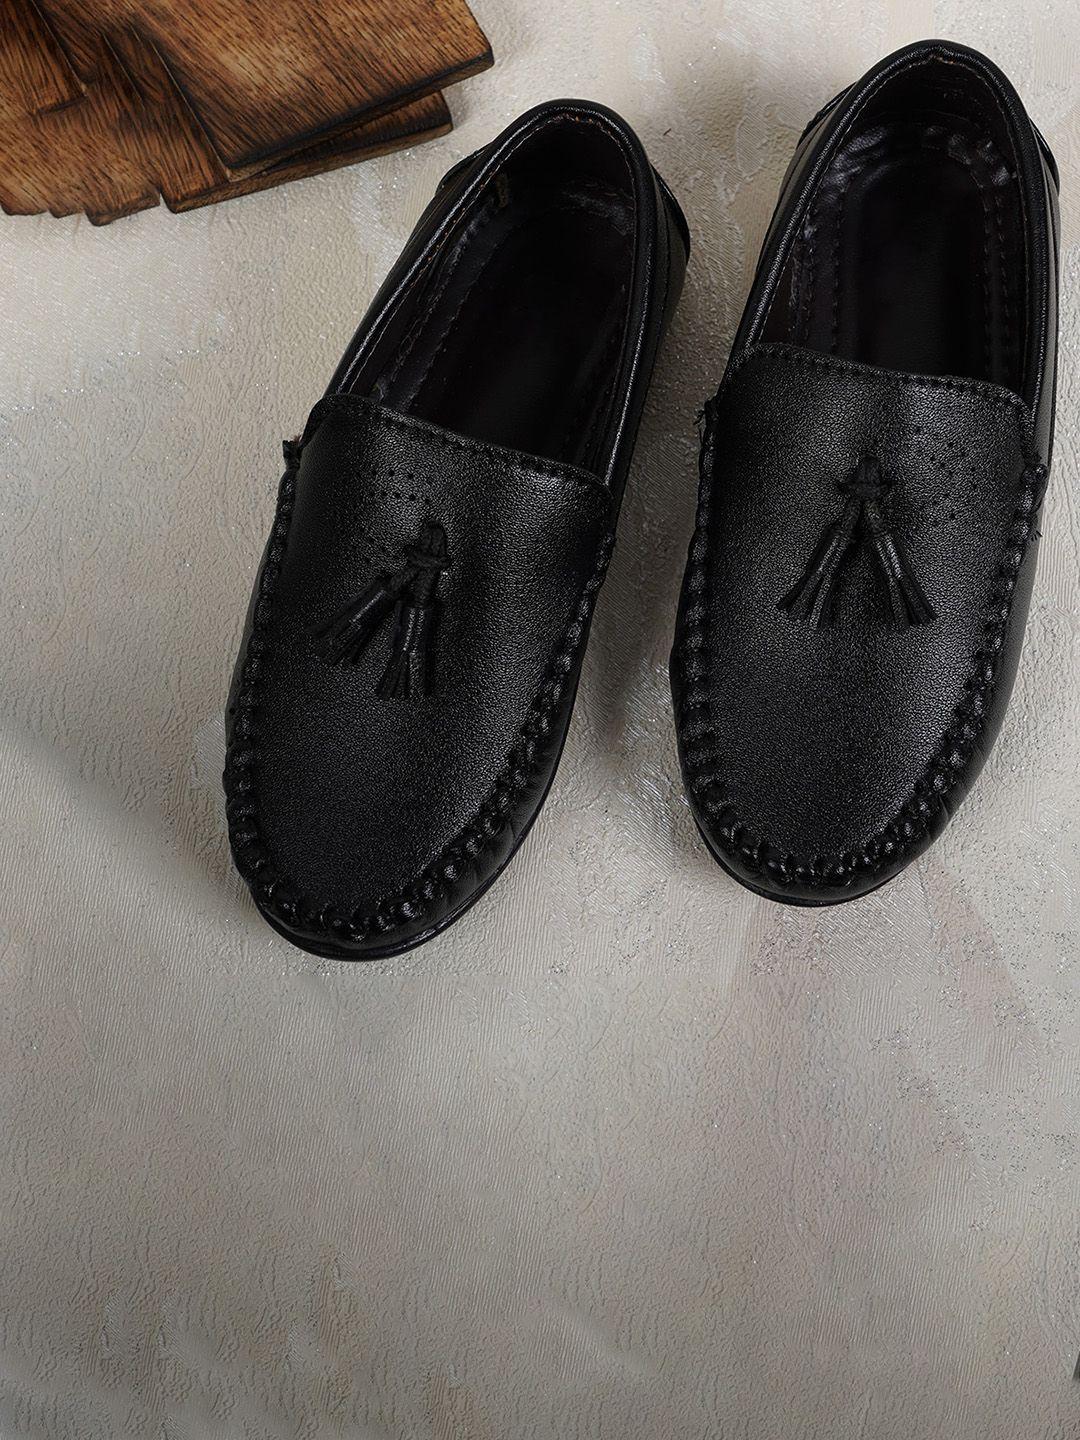 style shoes boys perforated tassel loafers